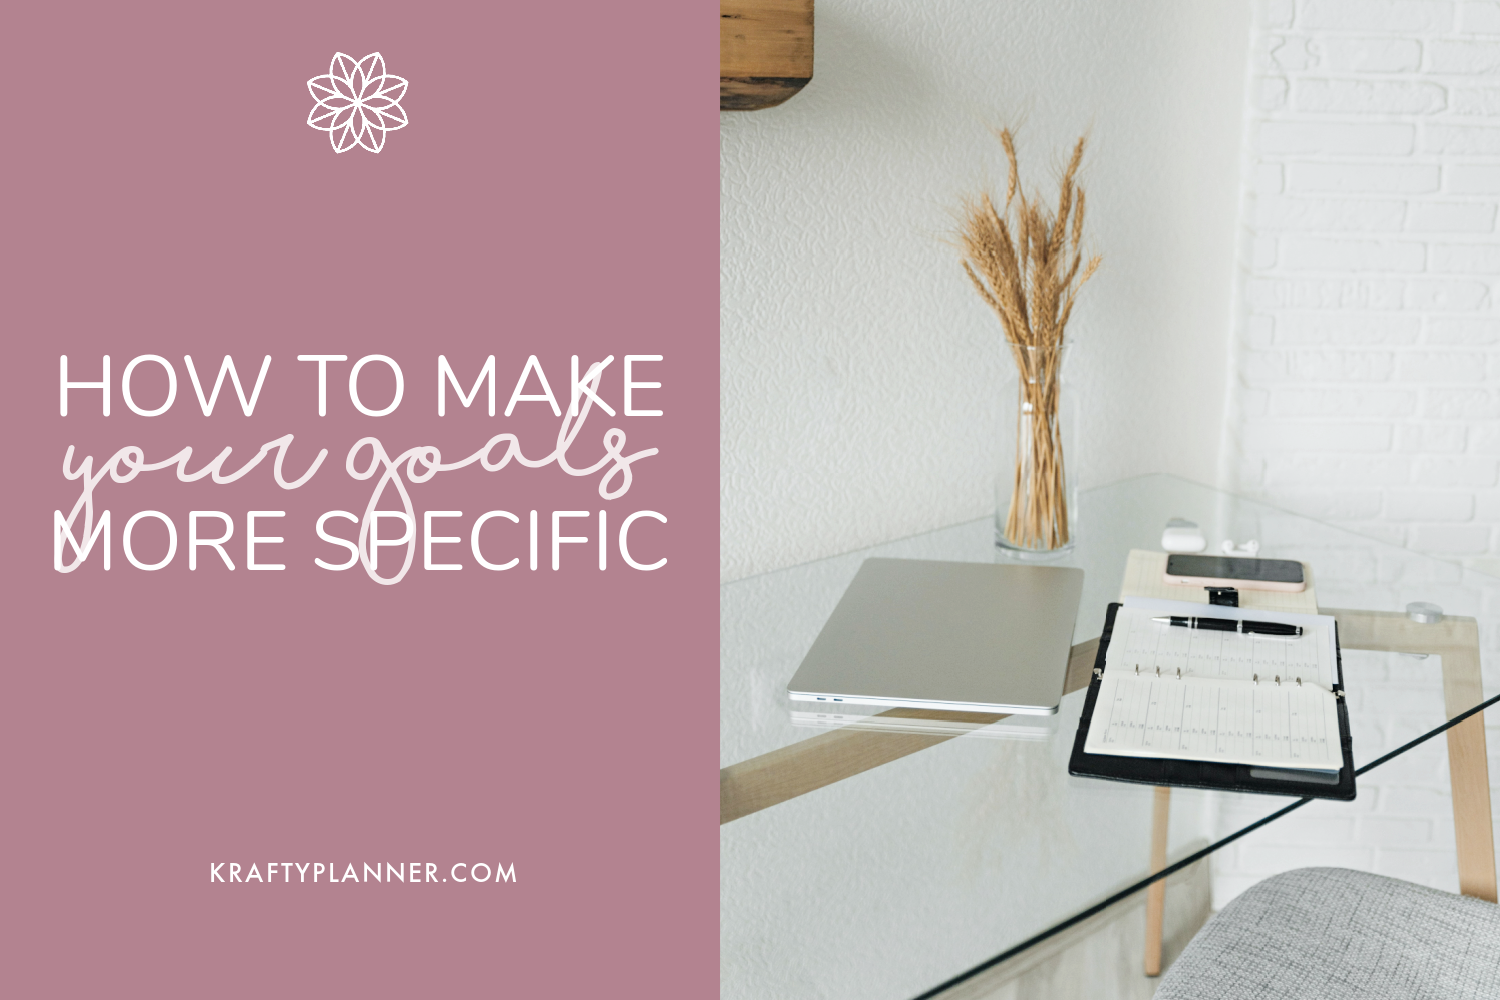 How To Make Your Goals More Specific | The Krafty Planner